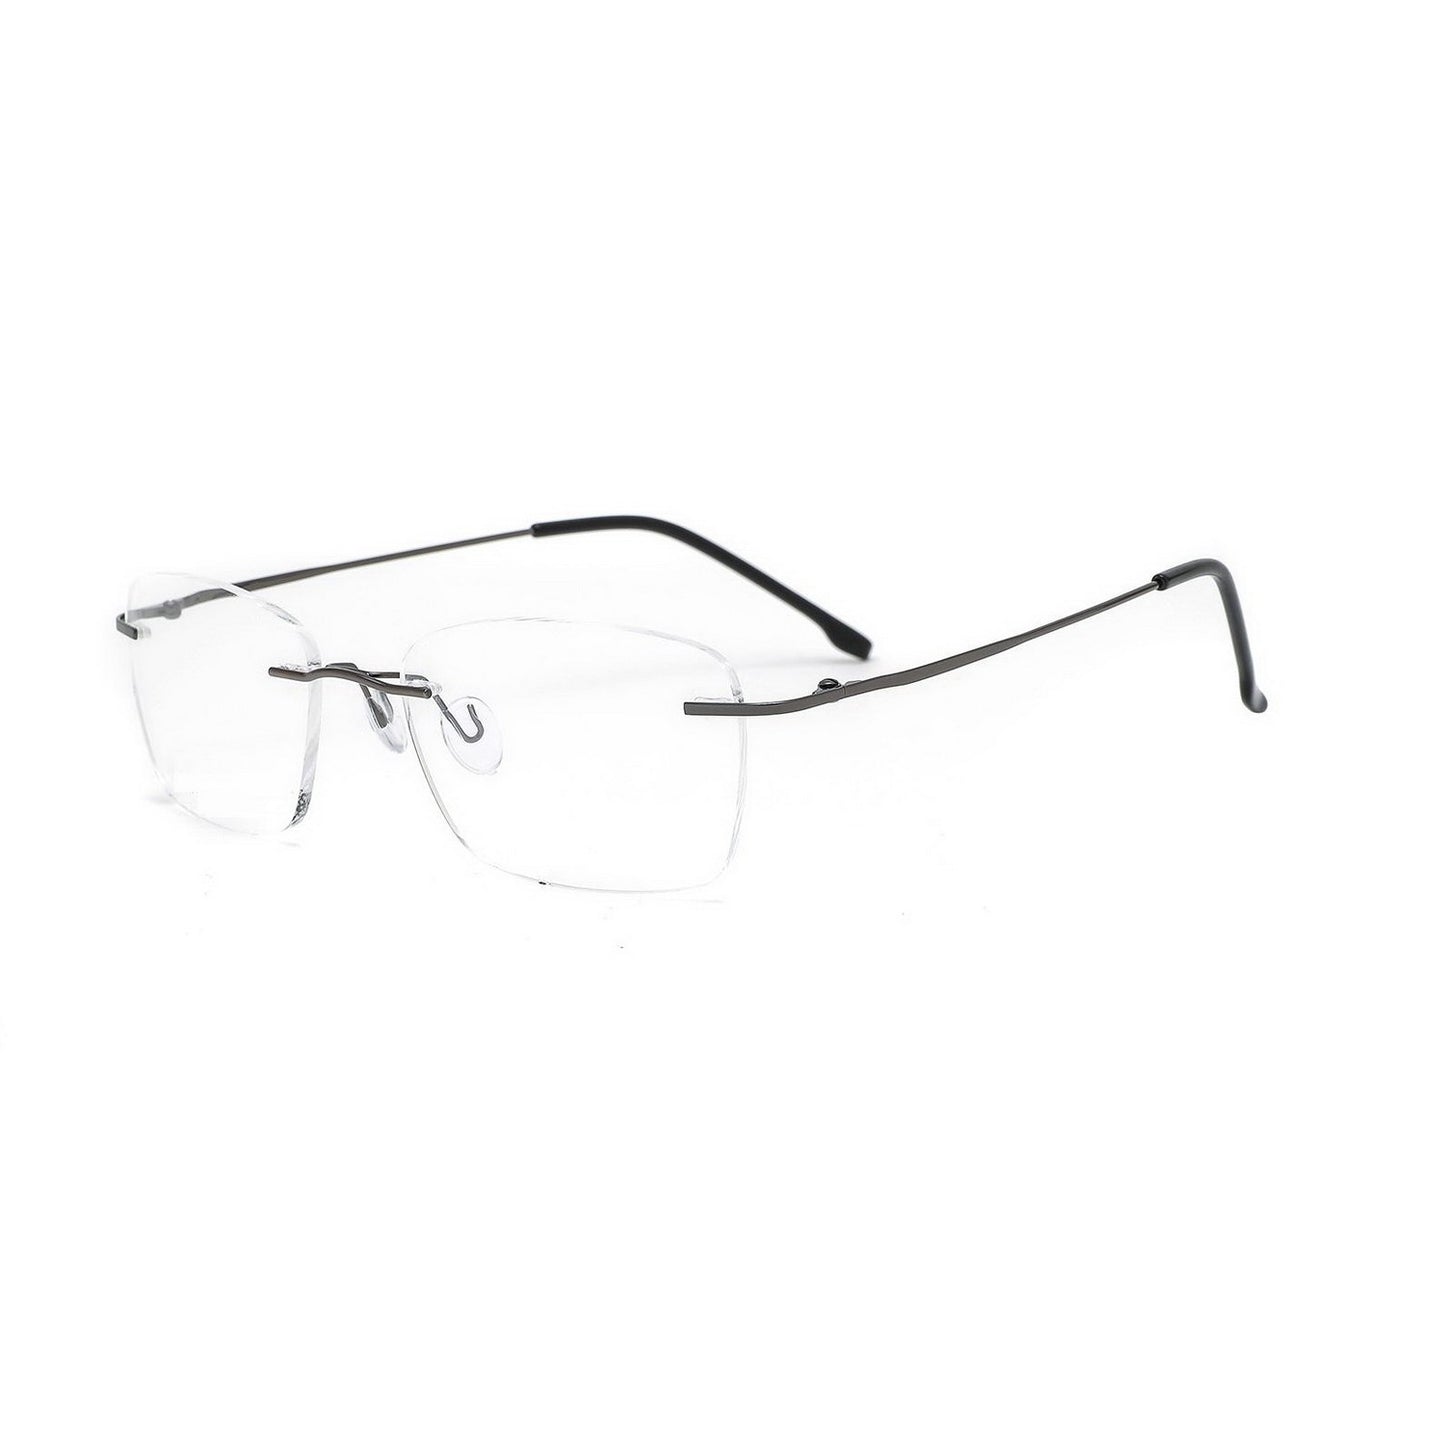 Rimless Glasses Spectacle Frame - Wide Rectangle Shape for Men and Women